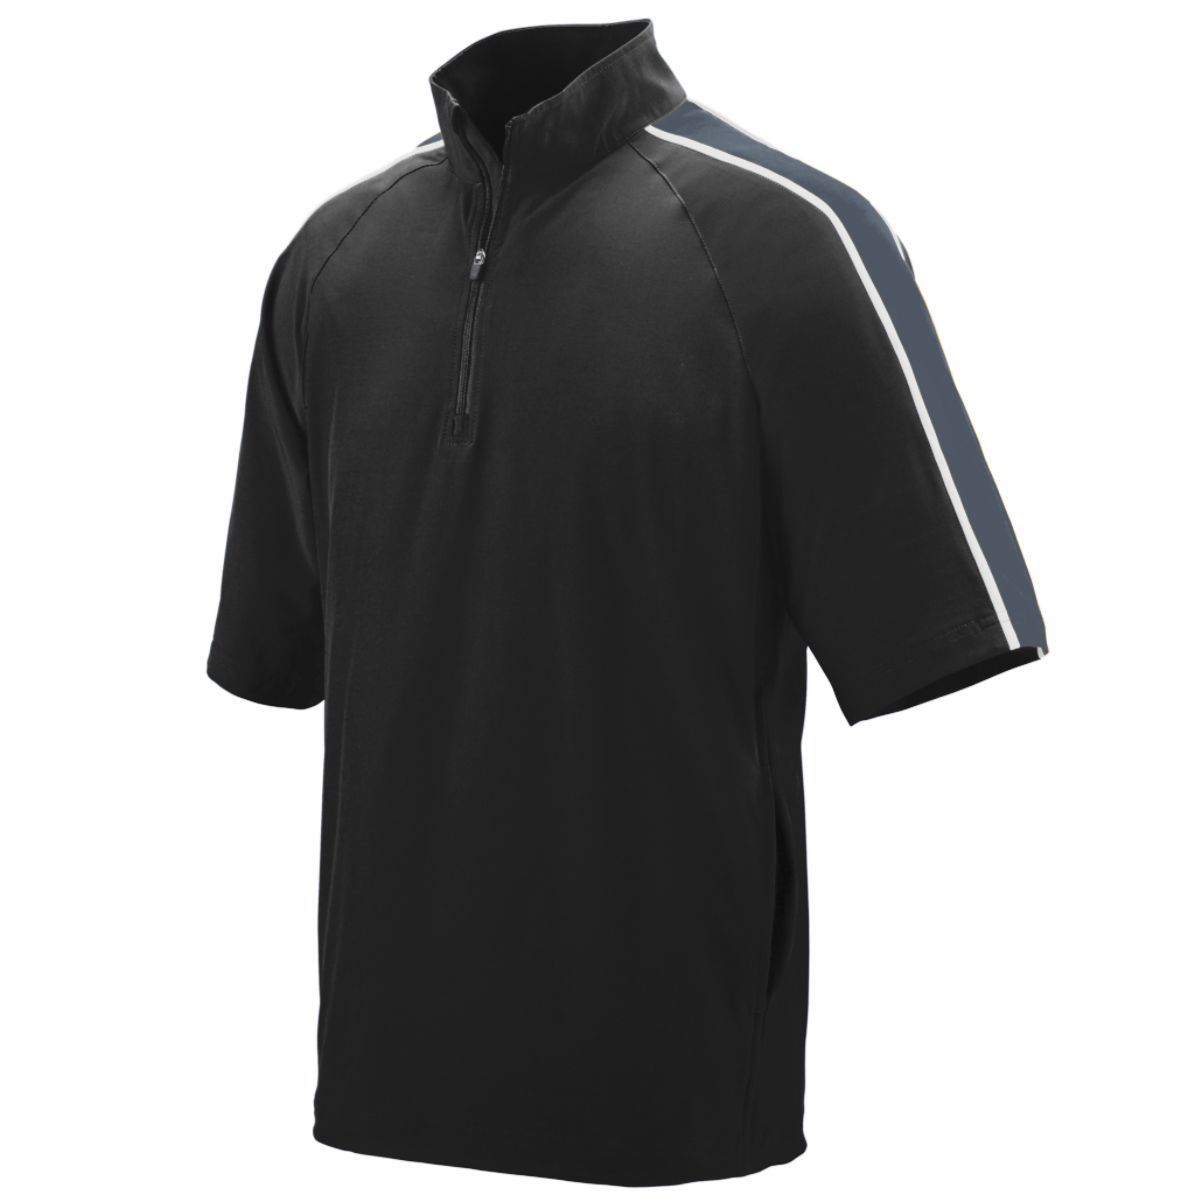 Augusta Sportswear Quantum Short Sleeve Pullover in Black/Graphite/White  -Part of the Adult, Adult-Jacket, Augusta-Products, Outerwear product lines at KanaleyCreations.com